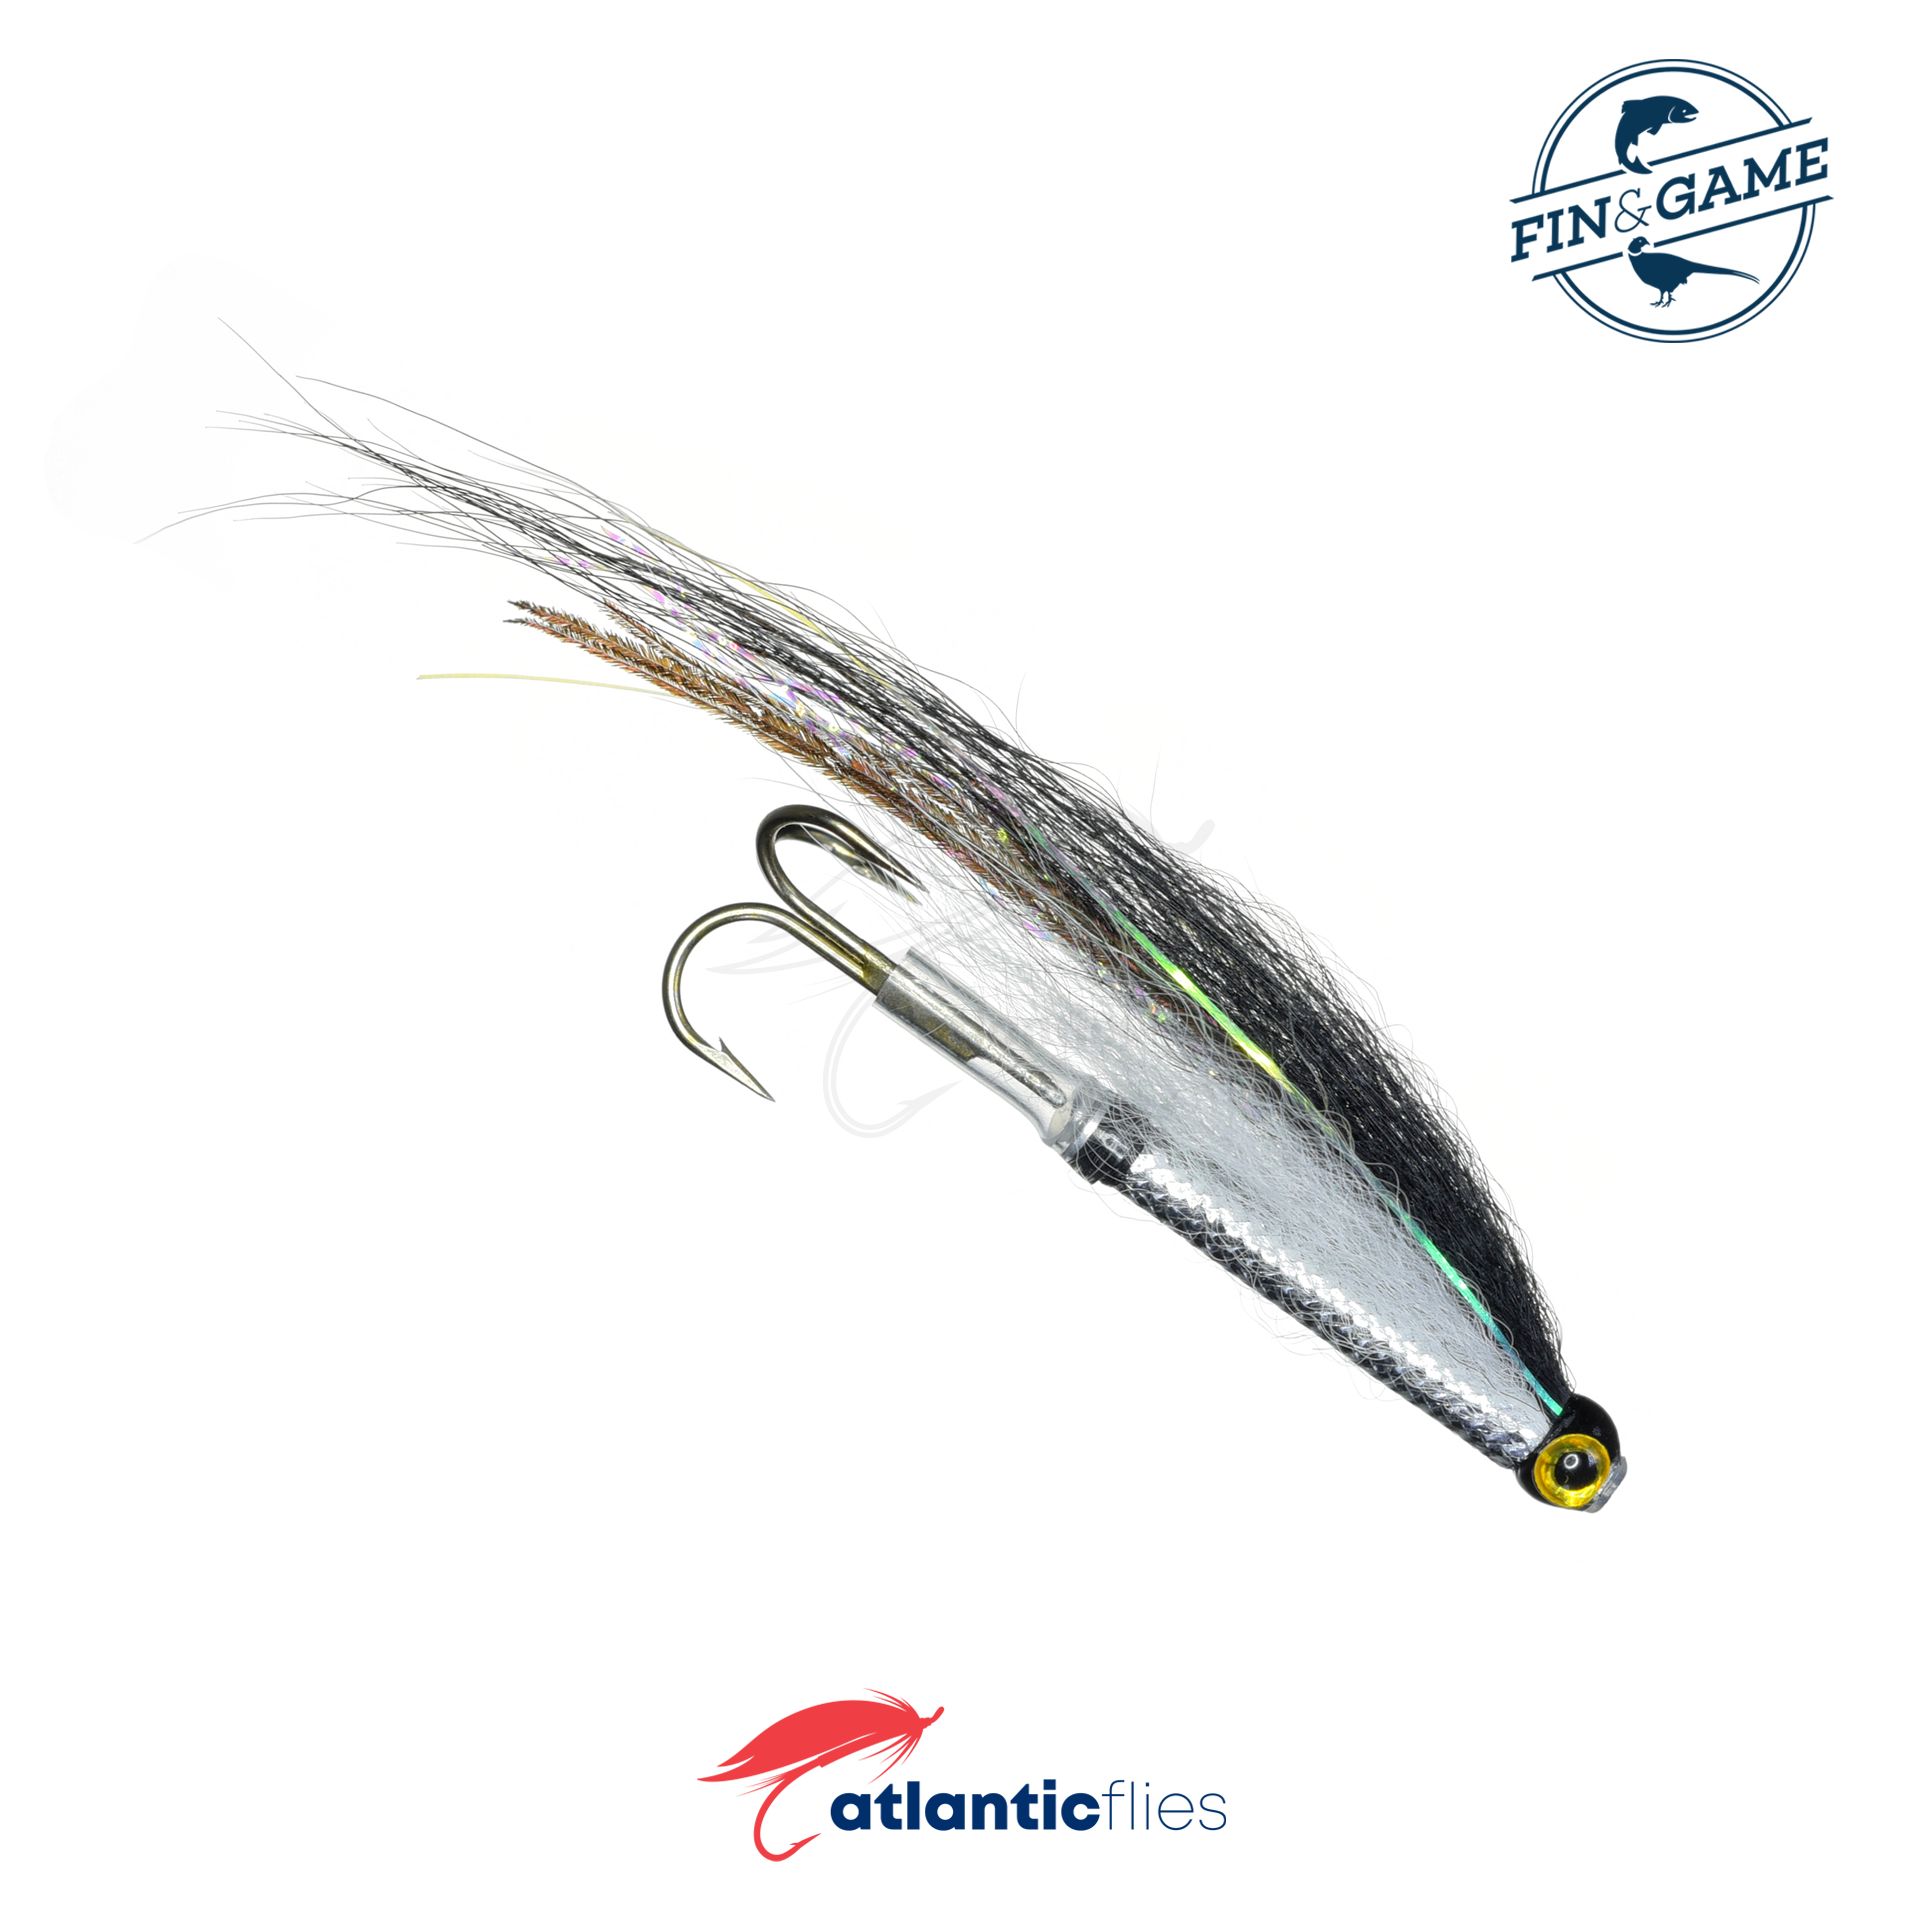 Atlantic Flies Pearl and Silver Bismo Tube - Fin & Game